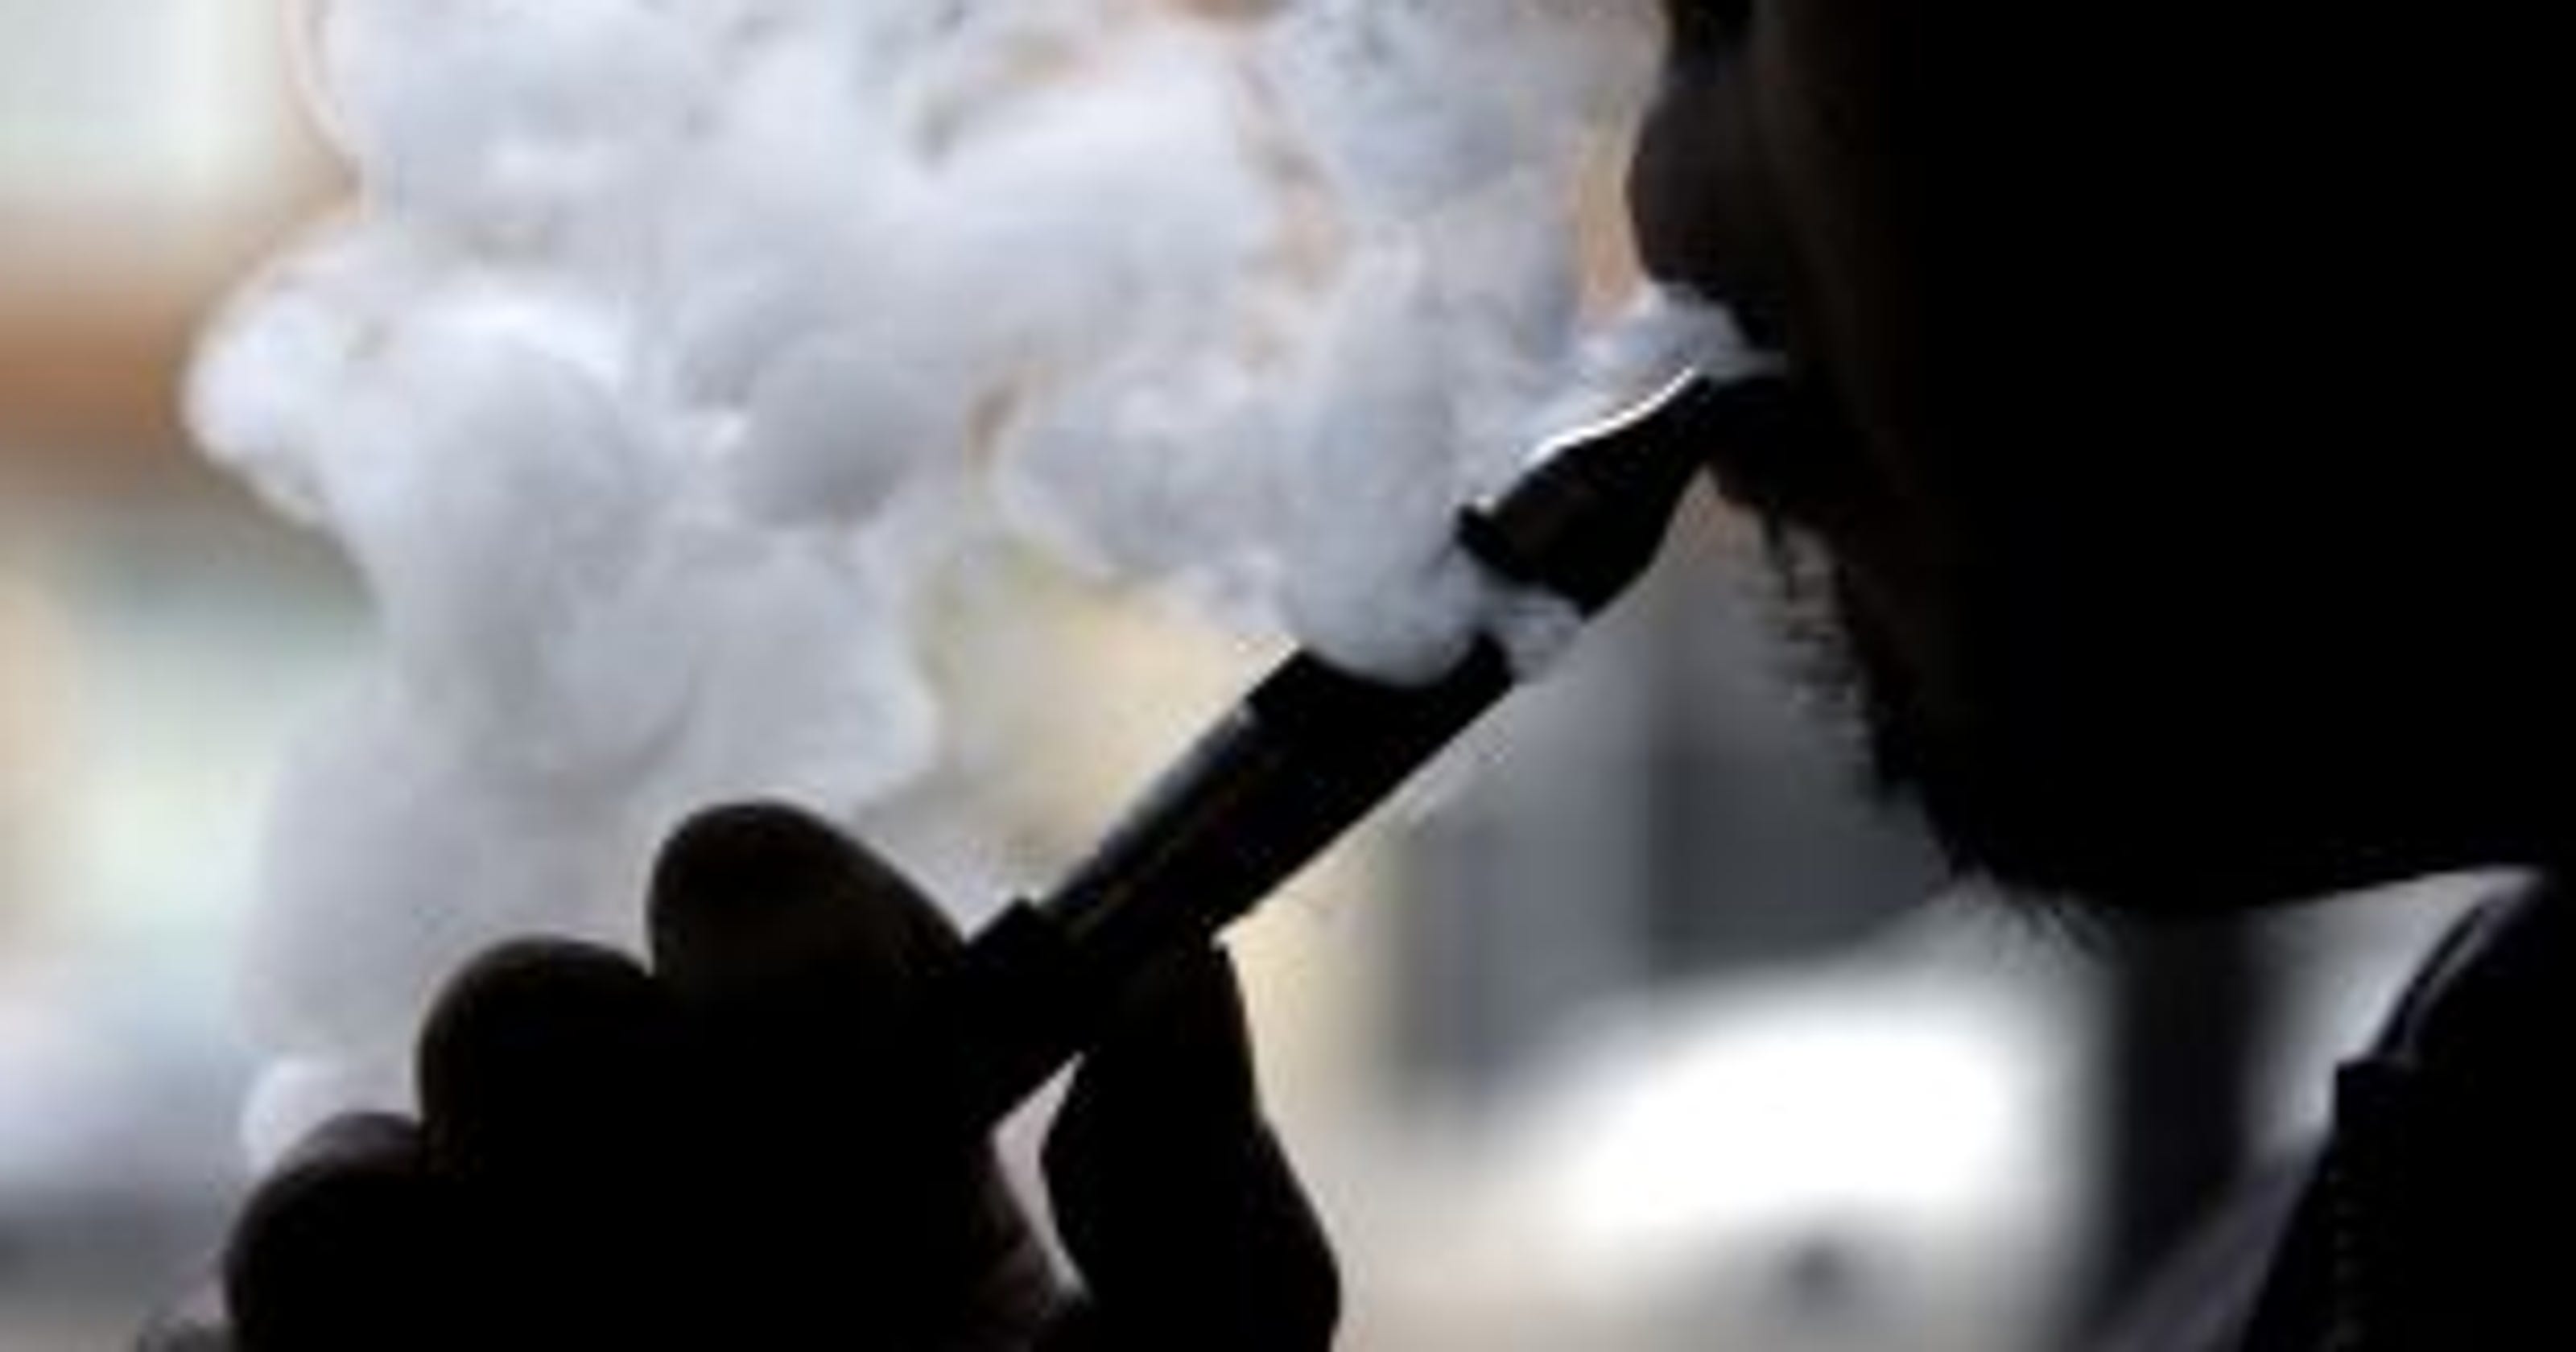 In A First, A Vaping Related Death Has Occurred In Illinois